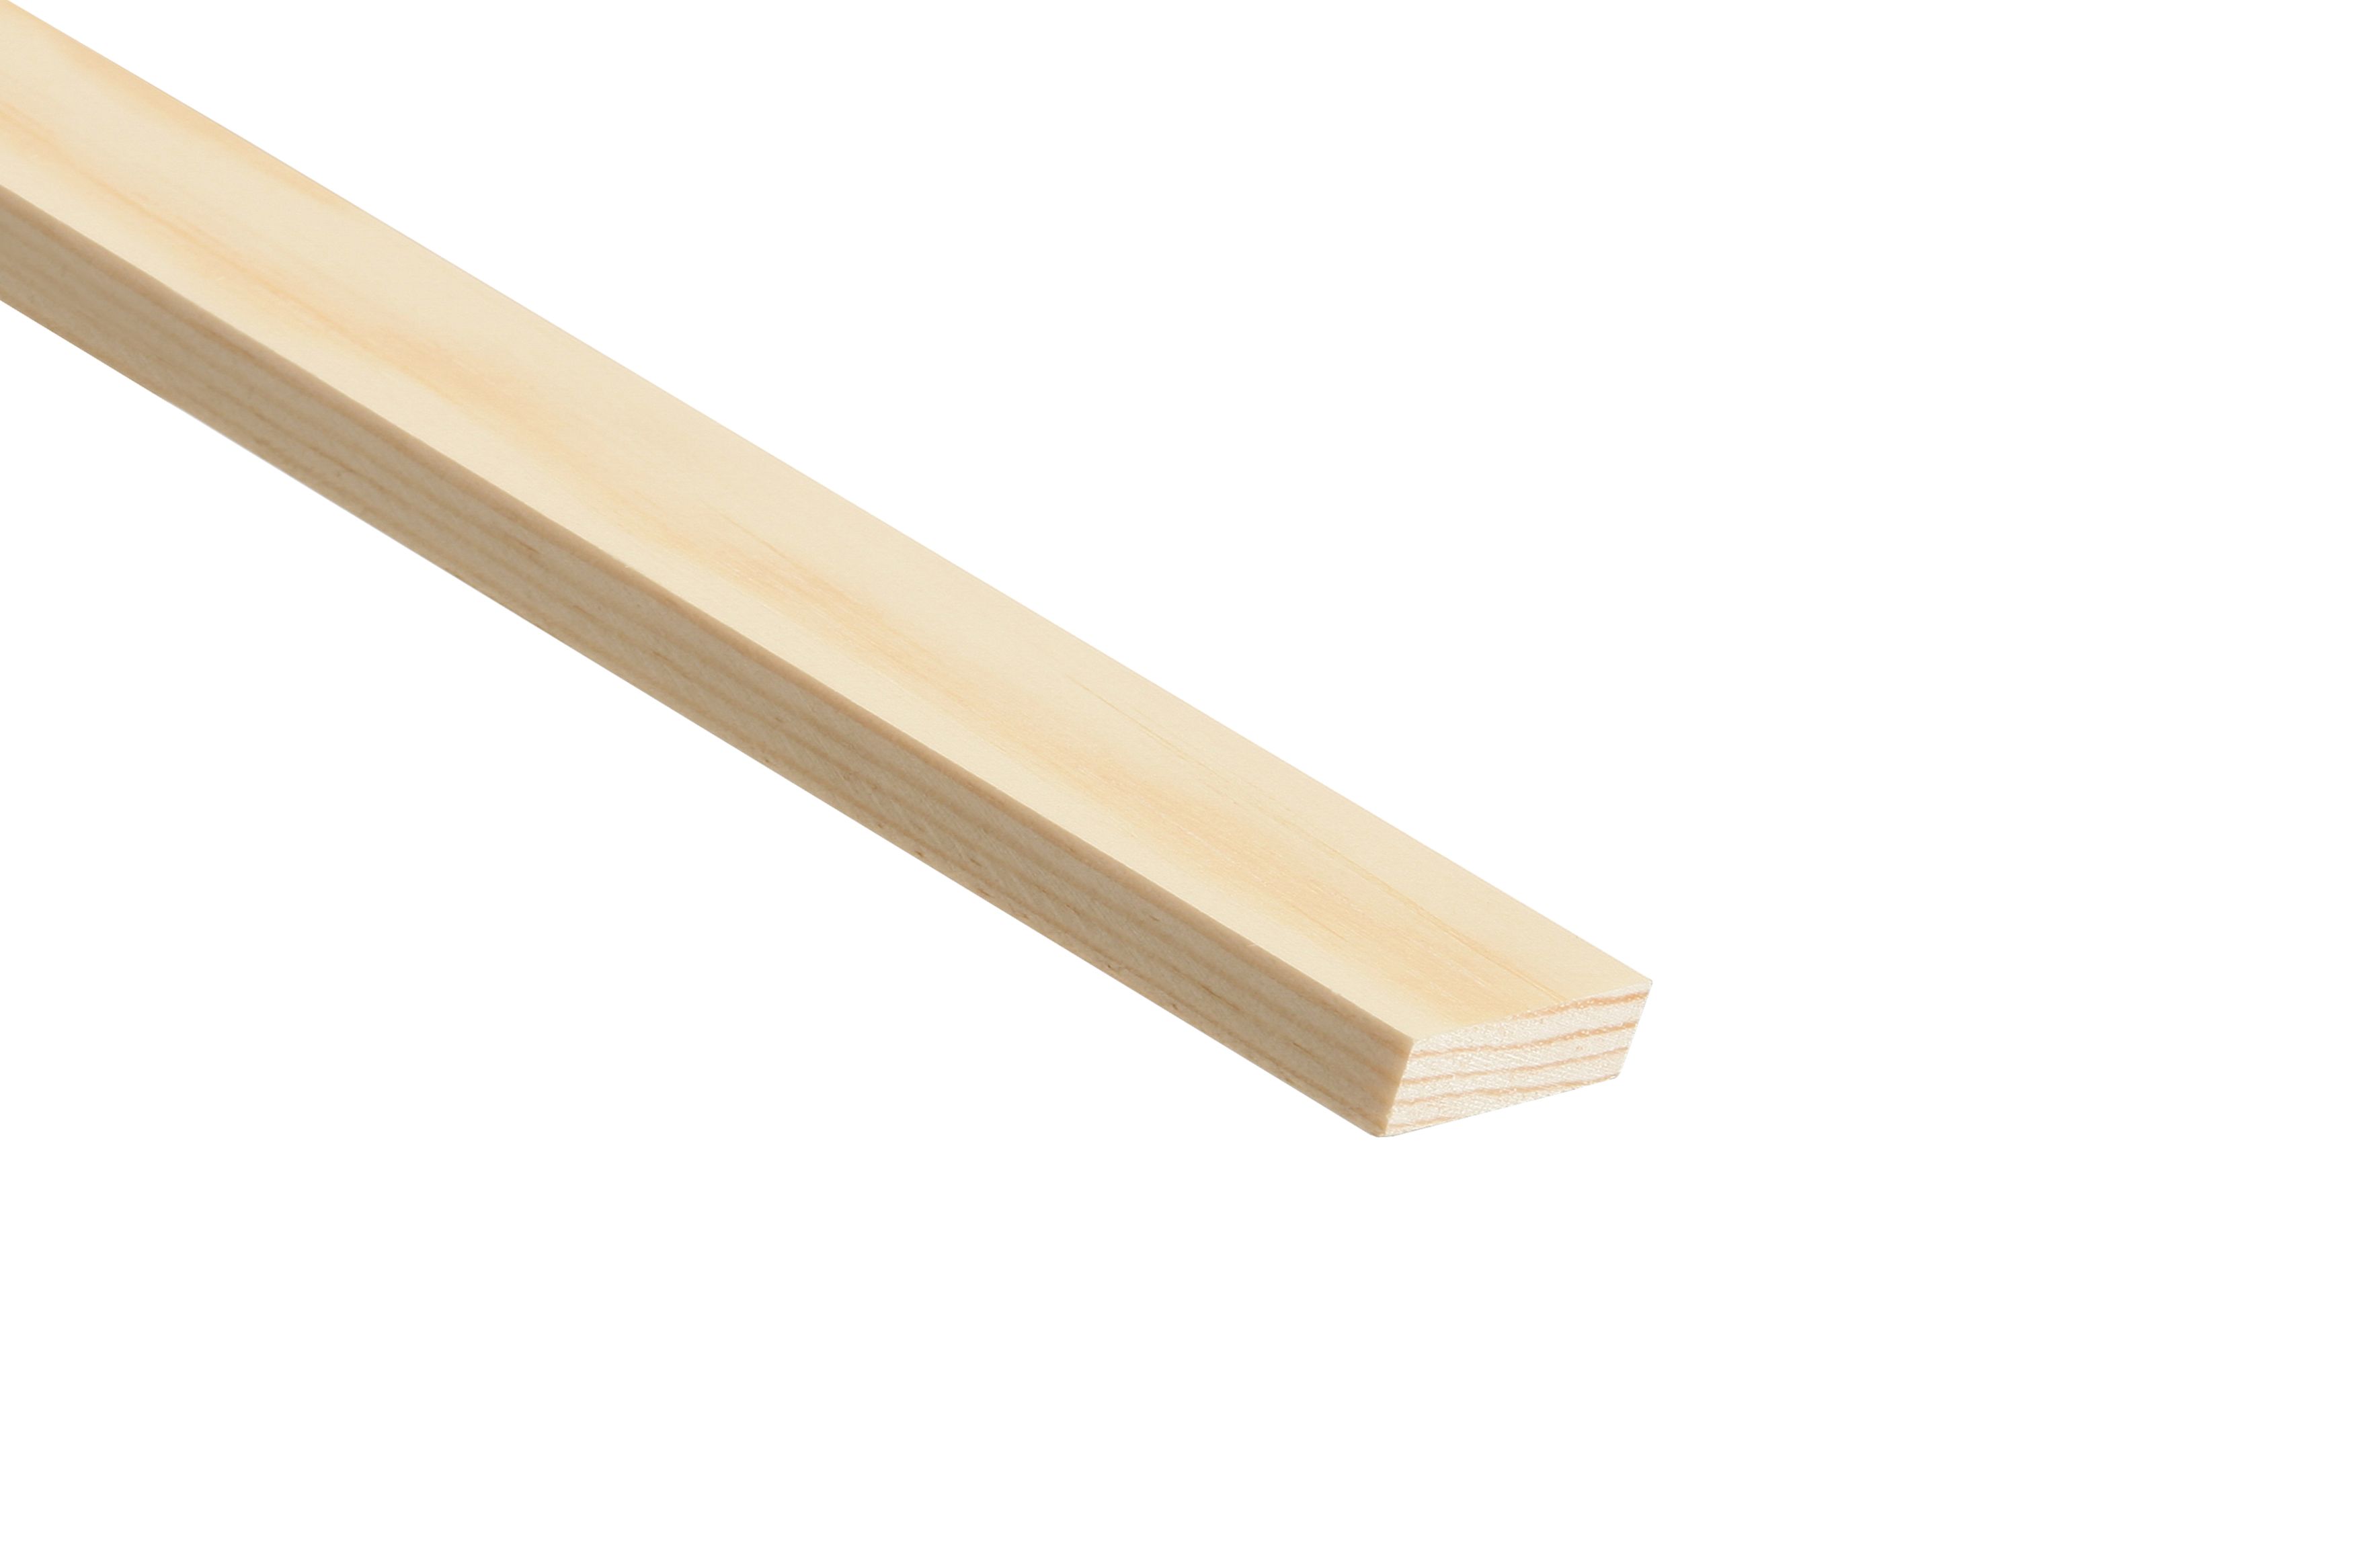 Image of Wickes Pine Stripwood Moulding (PSE) - 12 x 34 x 2400mm